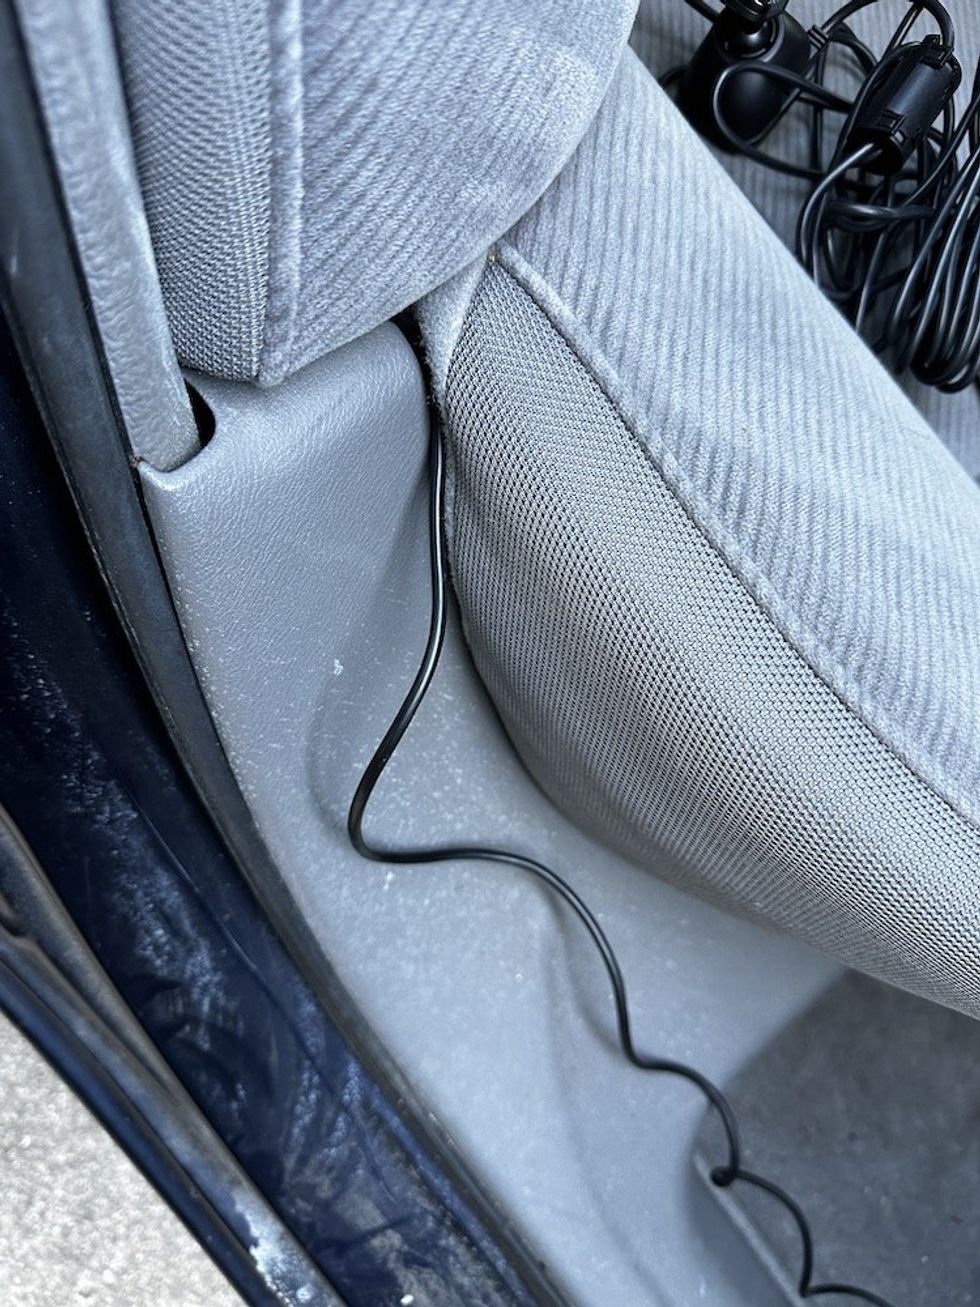 a photo of the Nextbase power cable being tucked behind the seats in a car